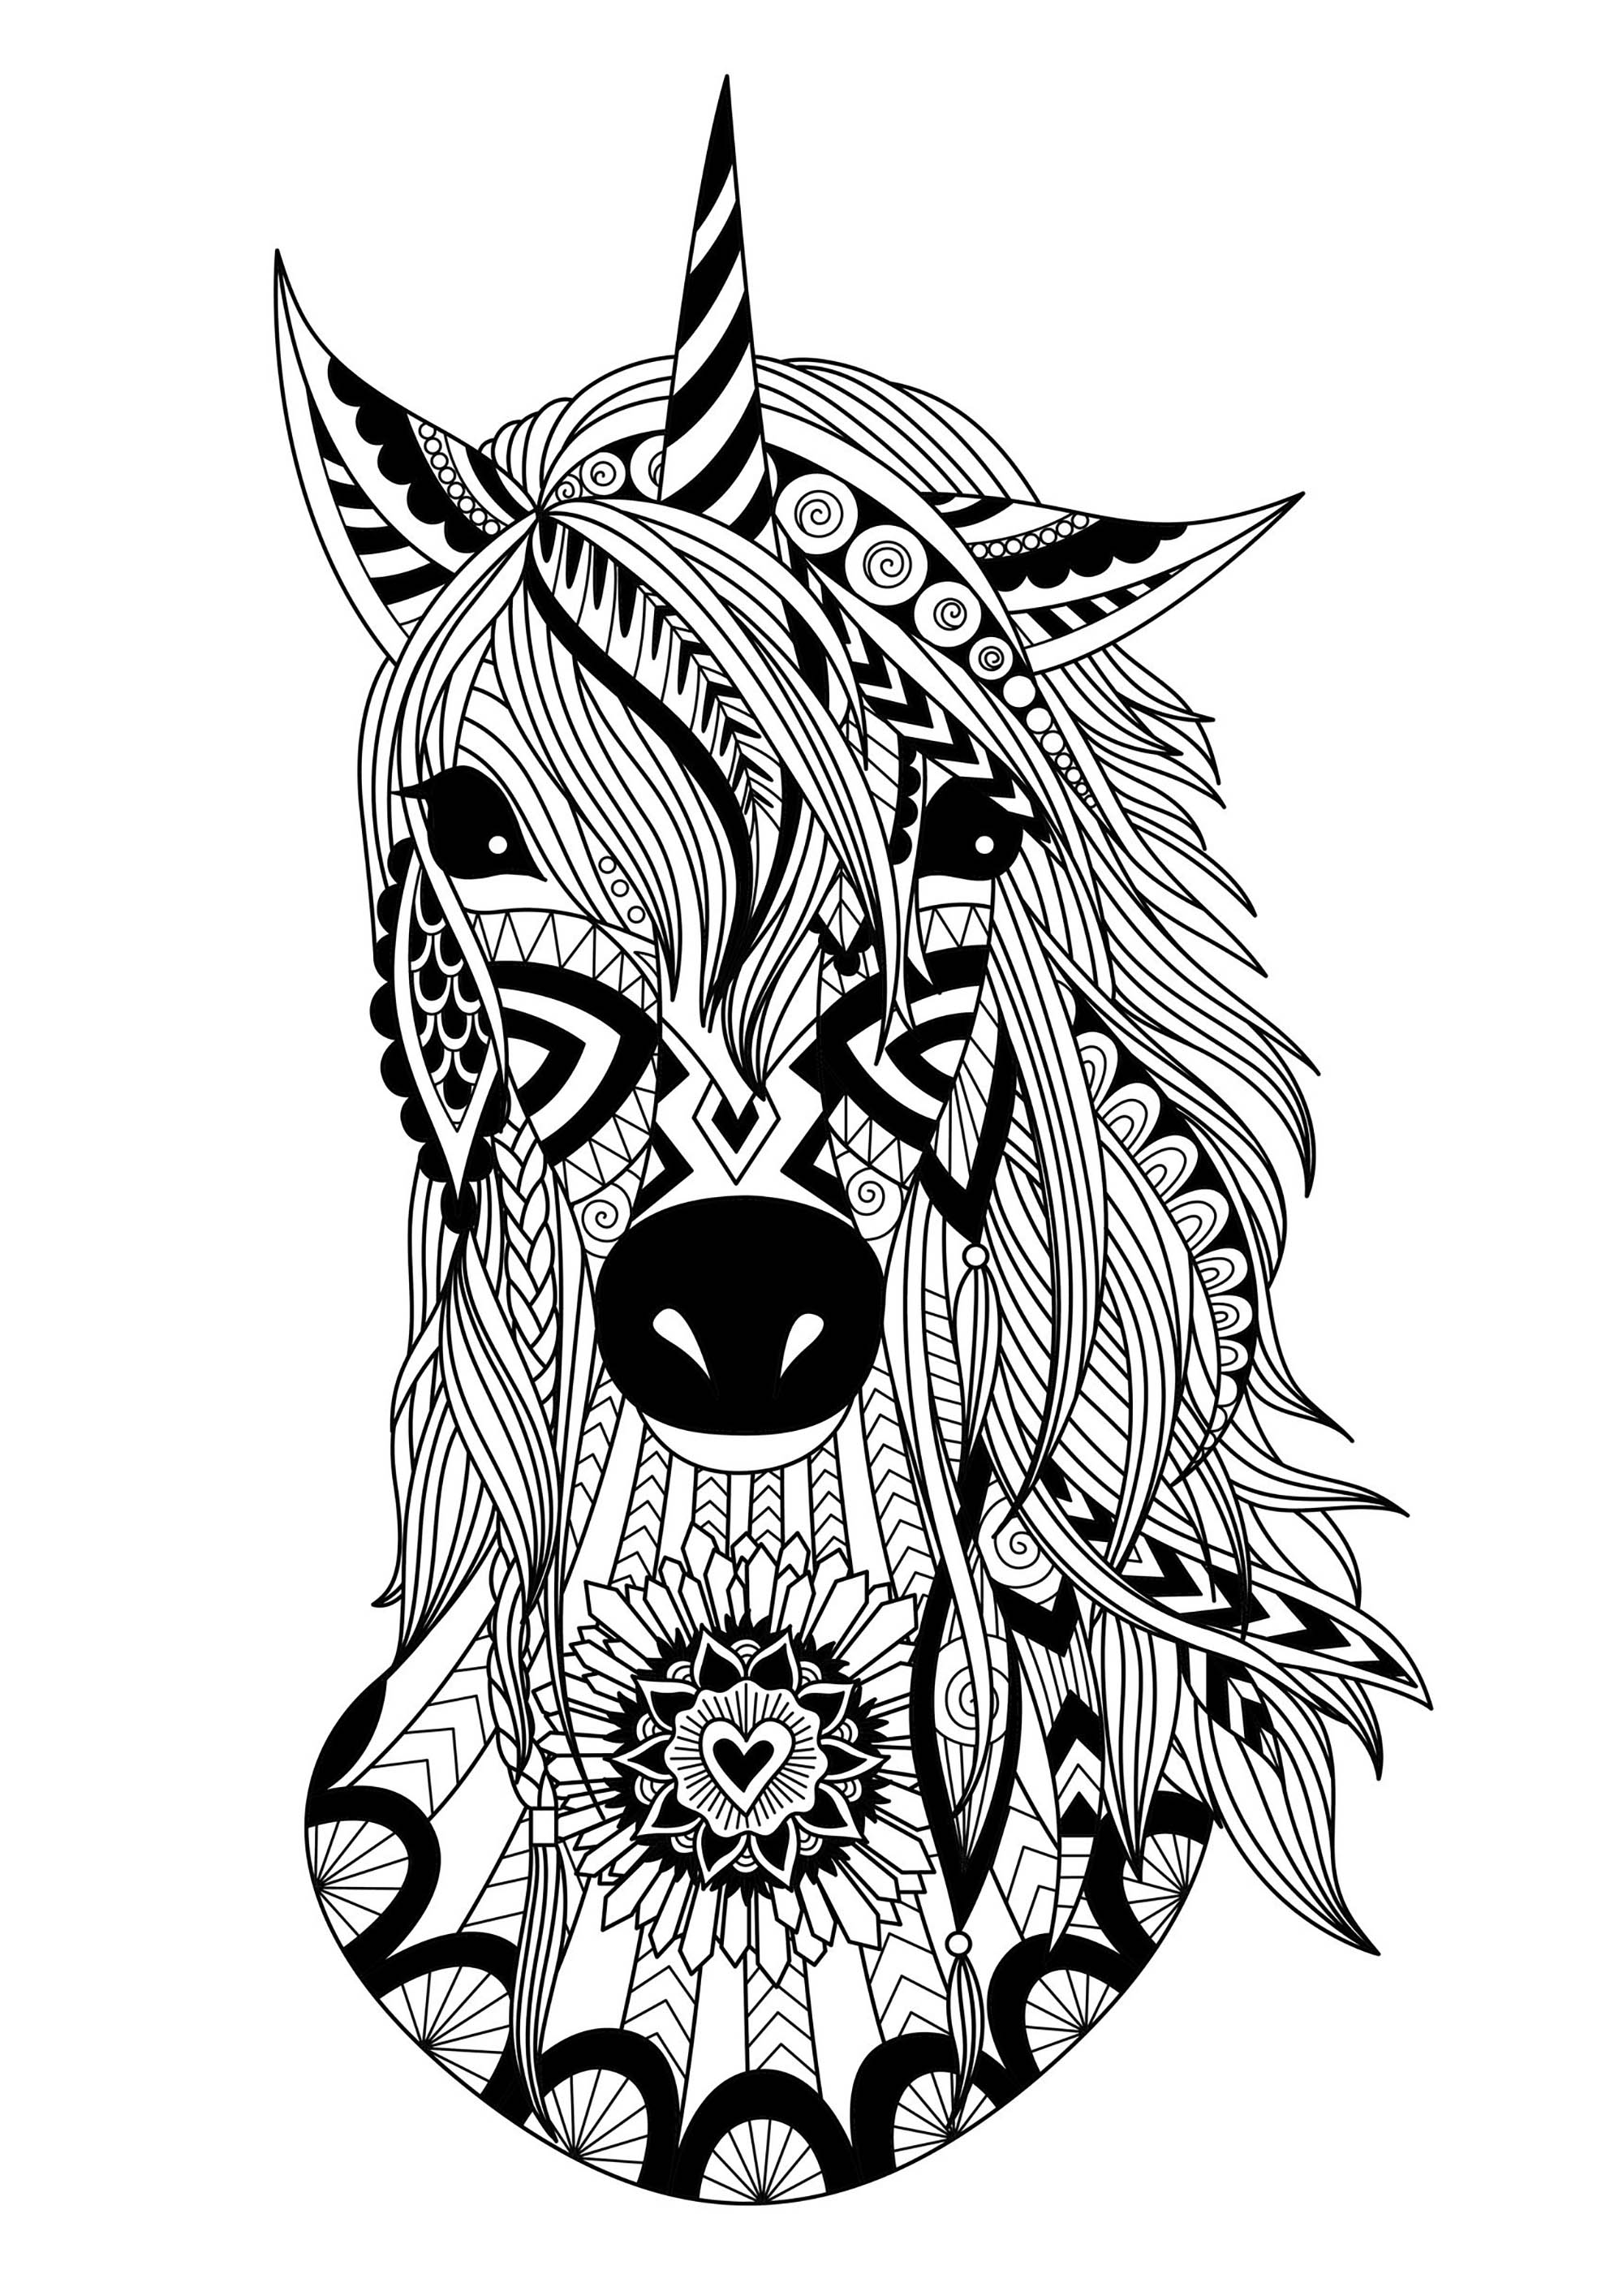 kids printable coloring pages unicorn